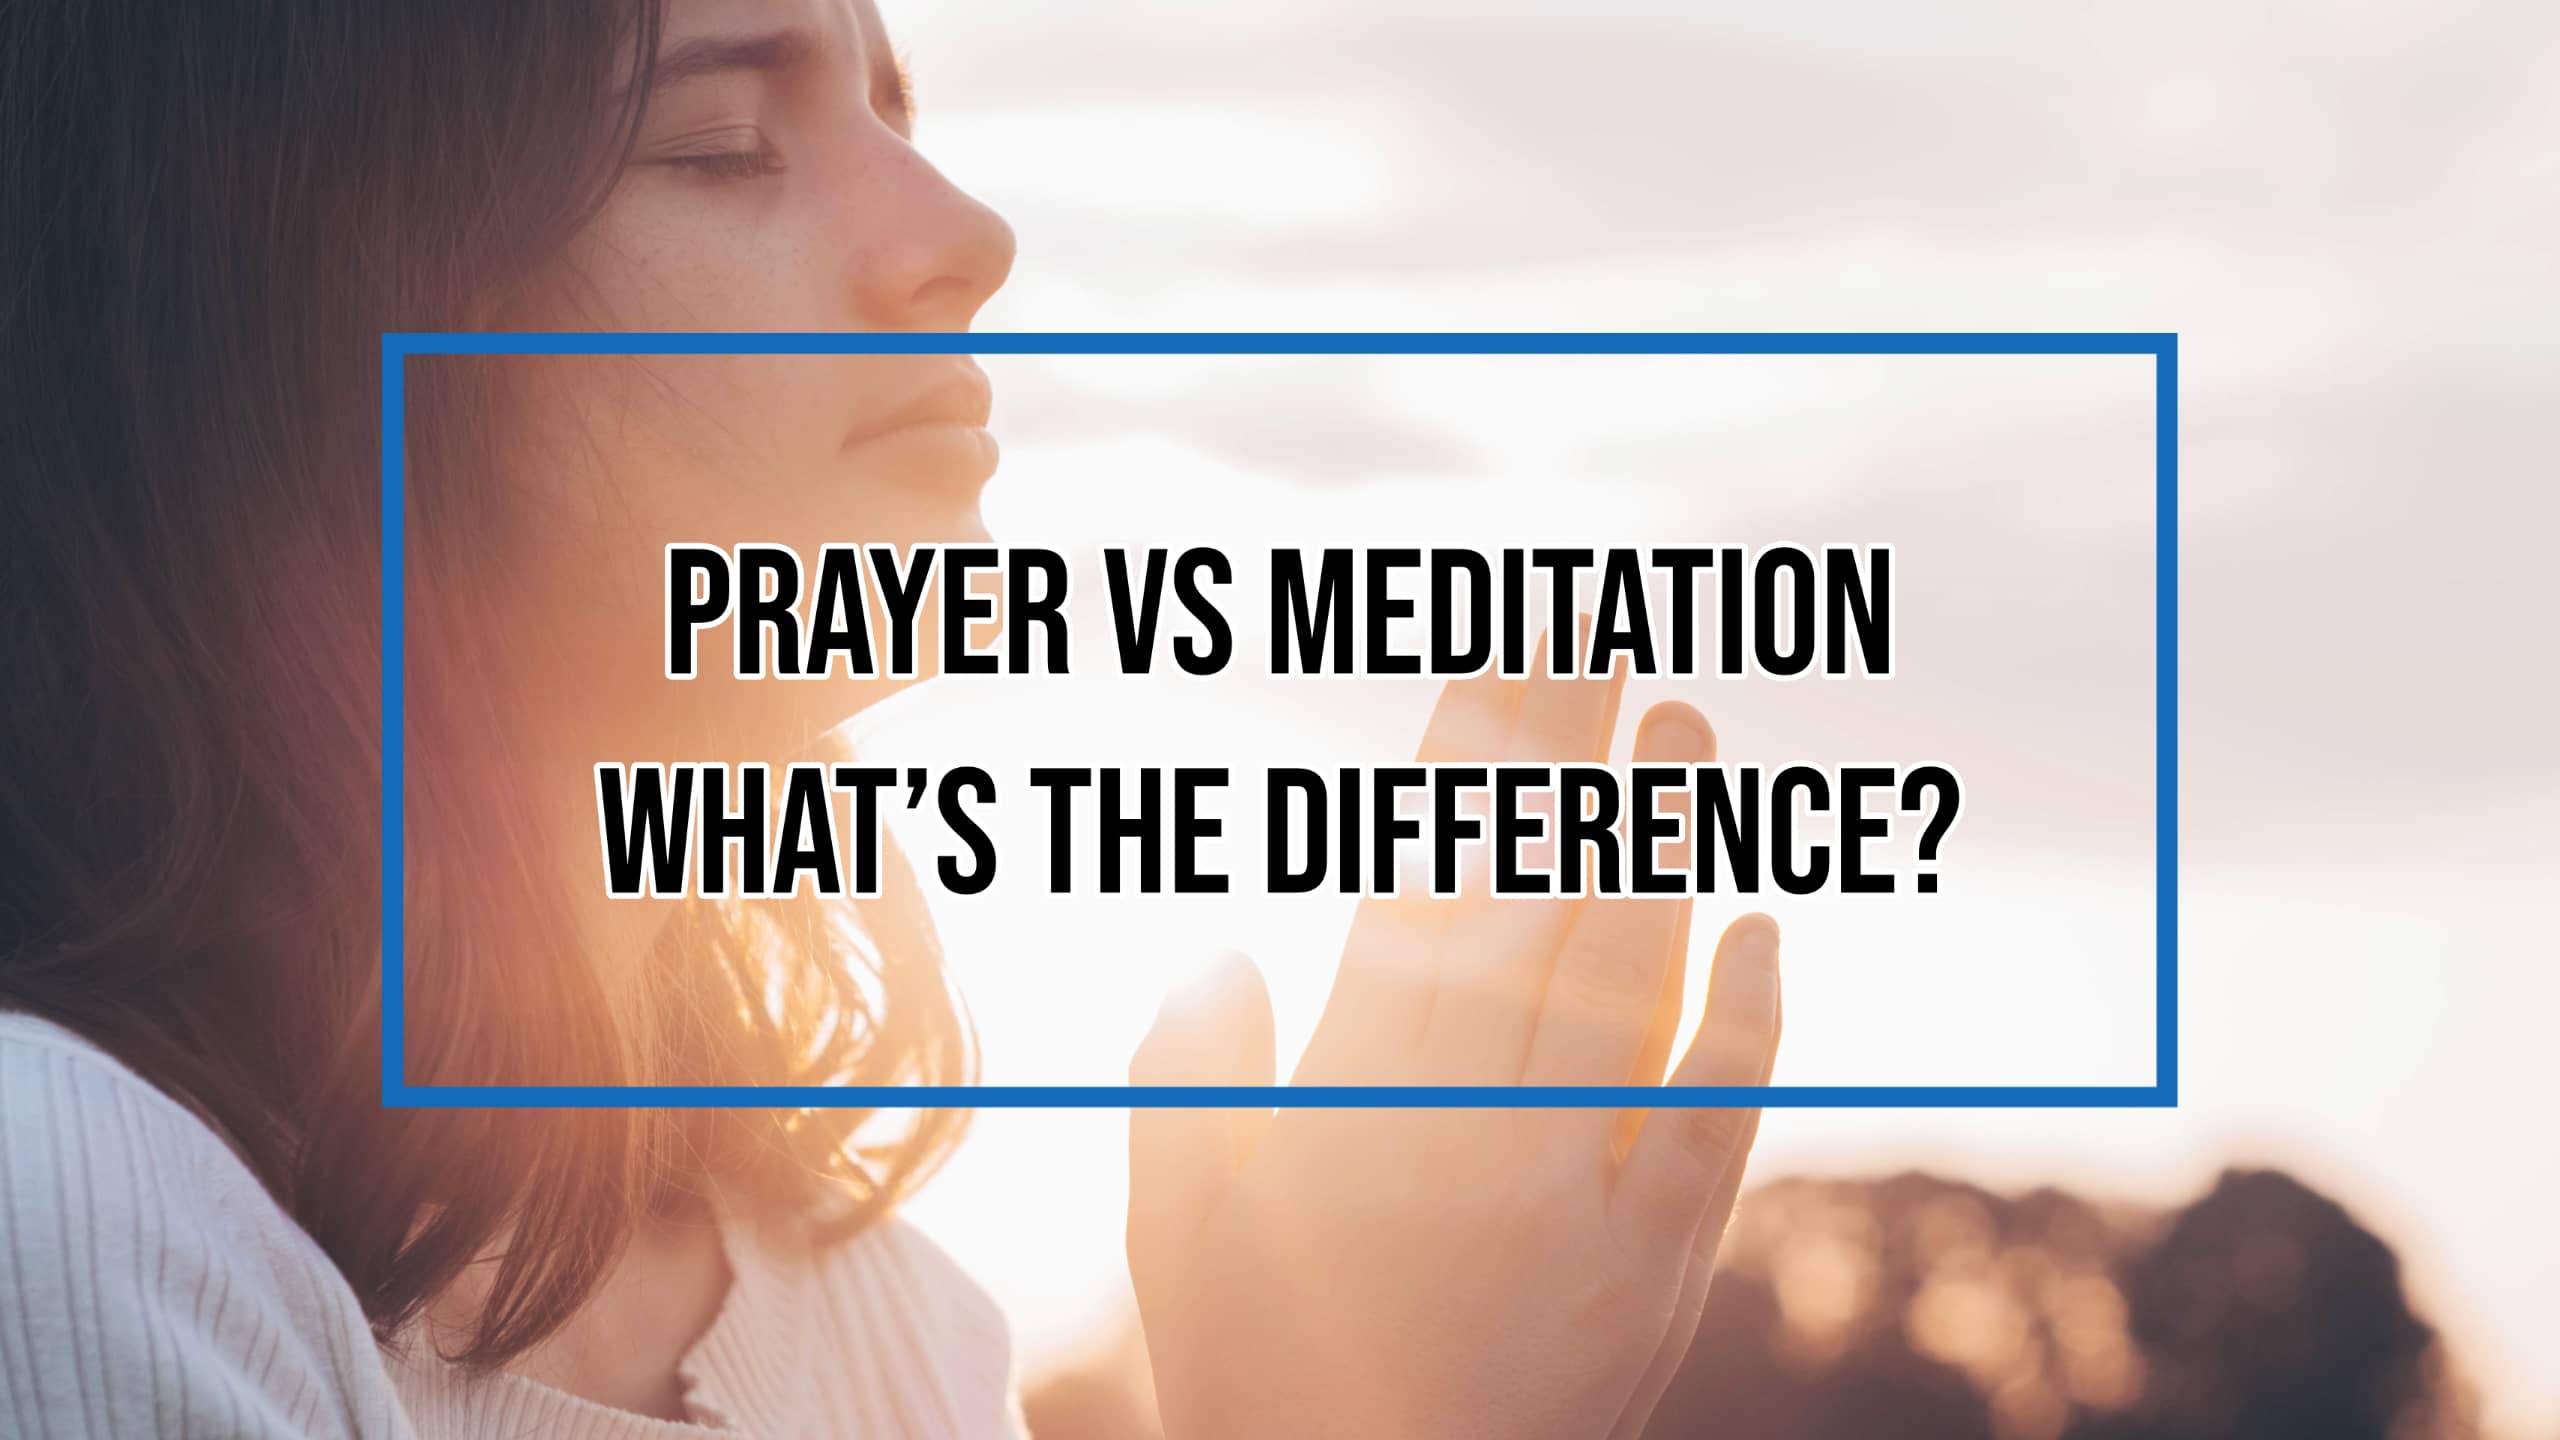 Prayer Vs Meditation - What's the Difference?